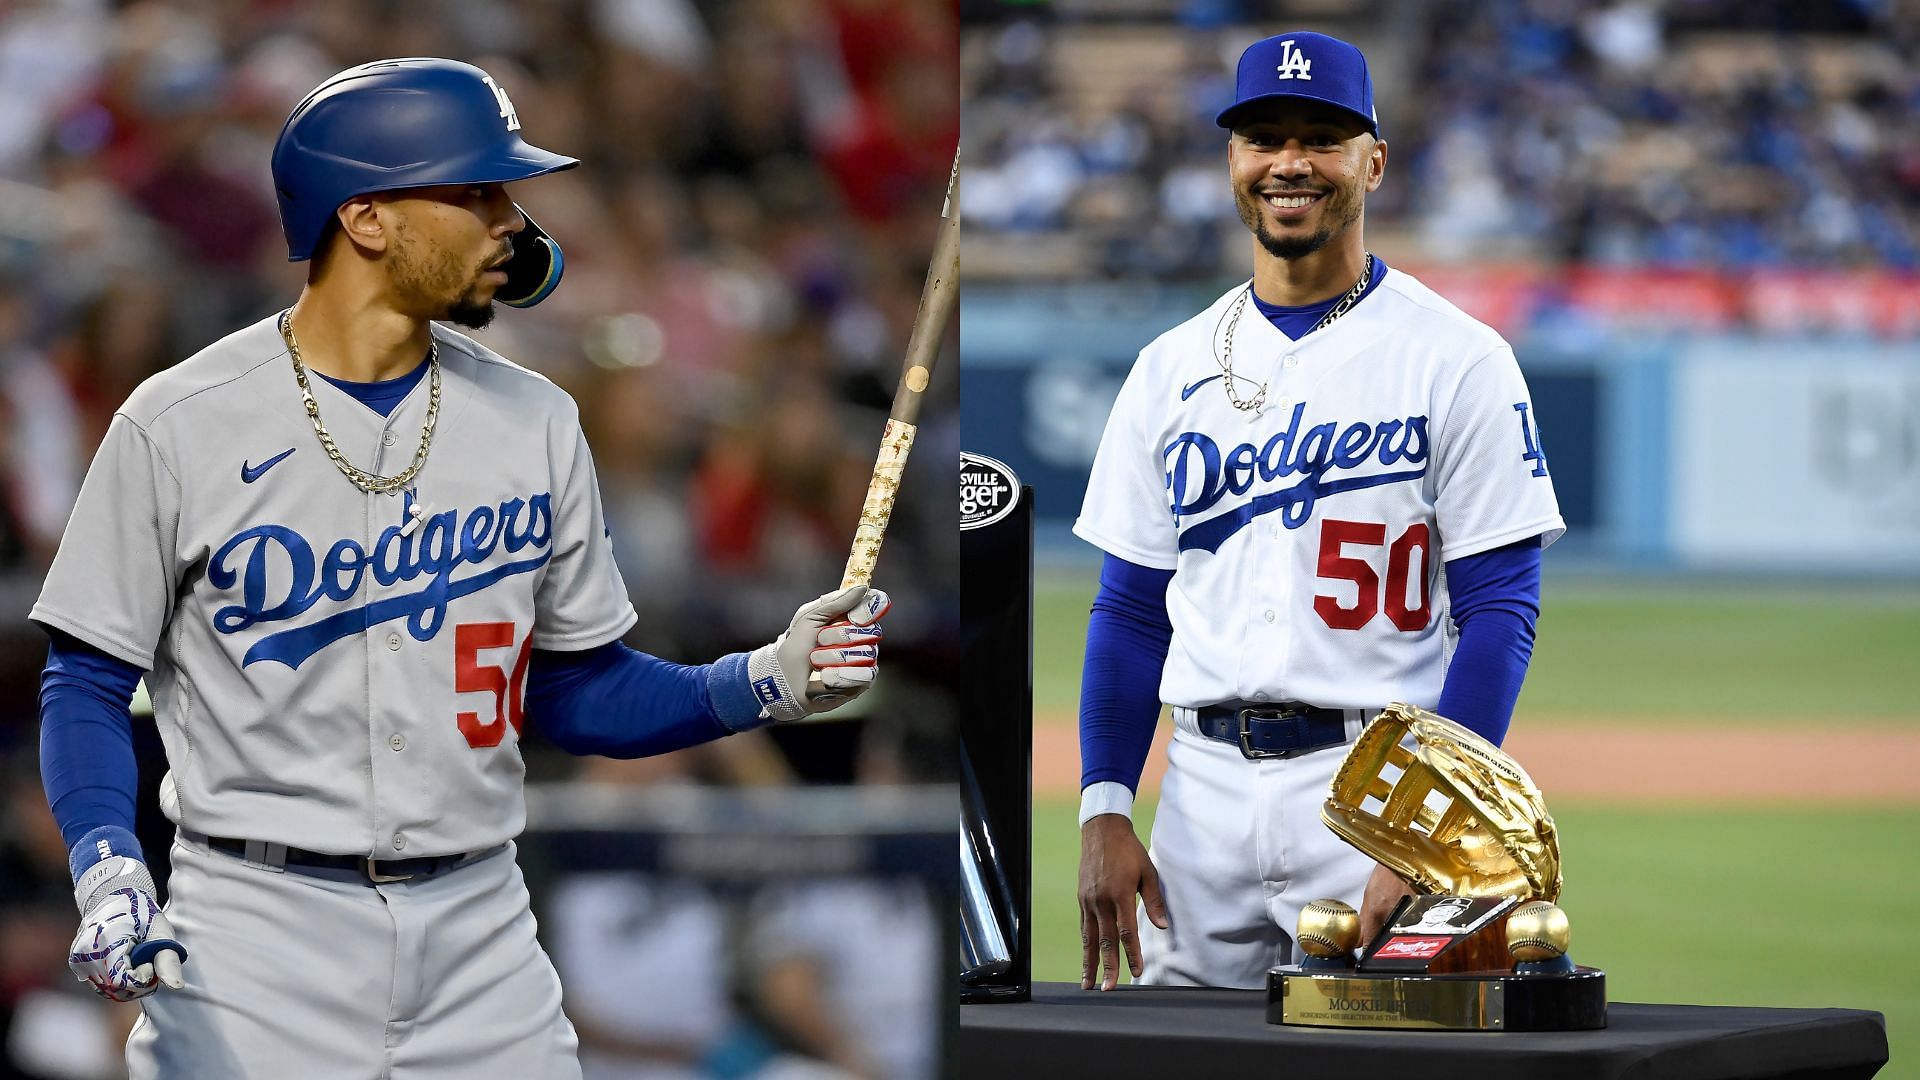 Mookie Betts gets trolled by Dodgers fans after winning 6th Silver Slugger award. 